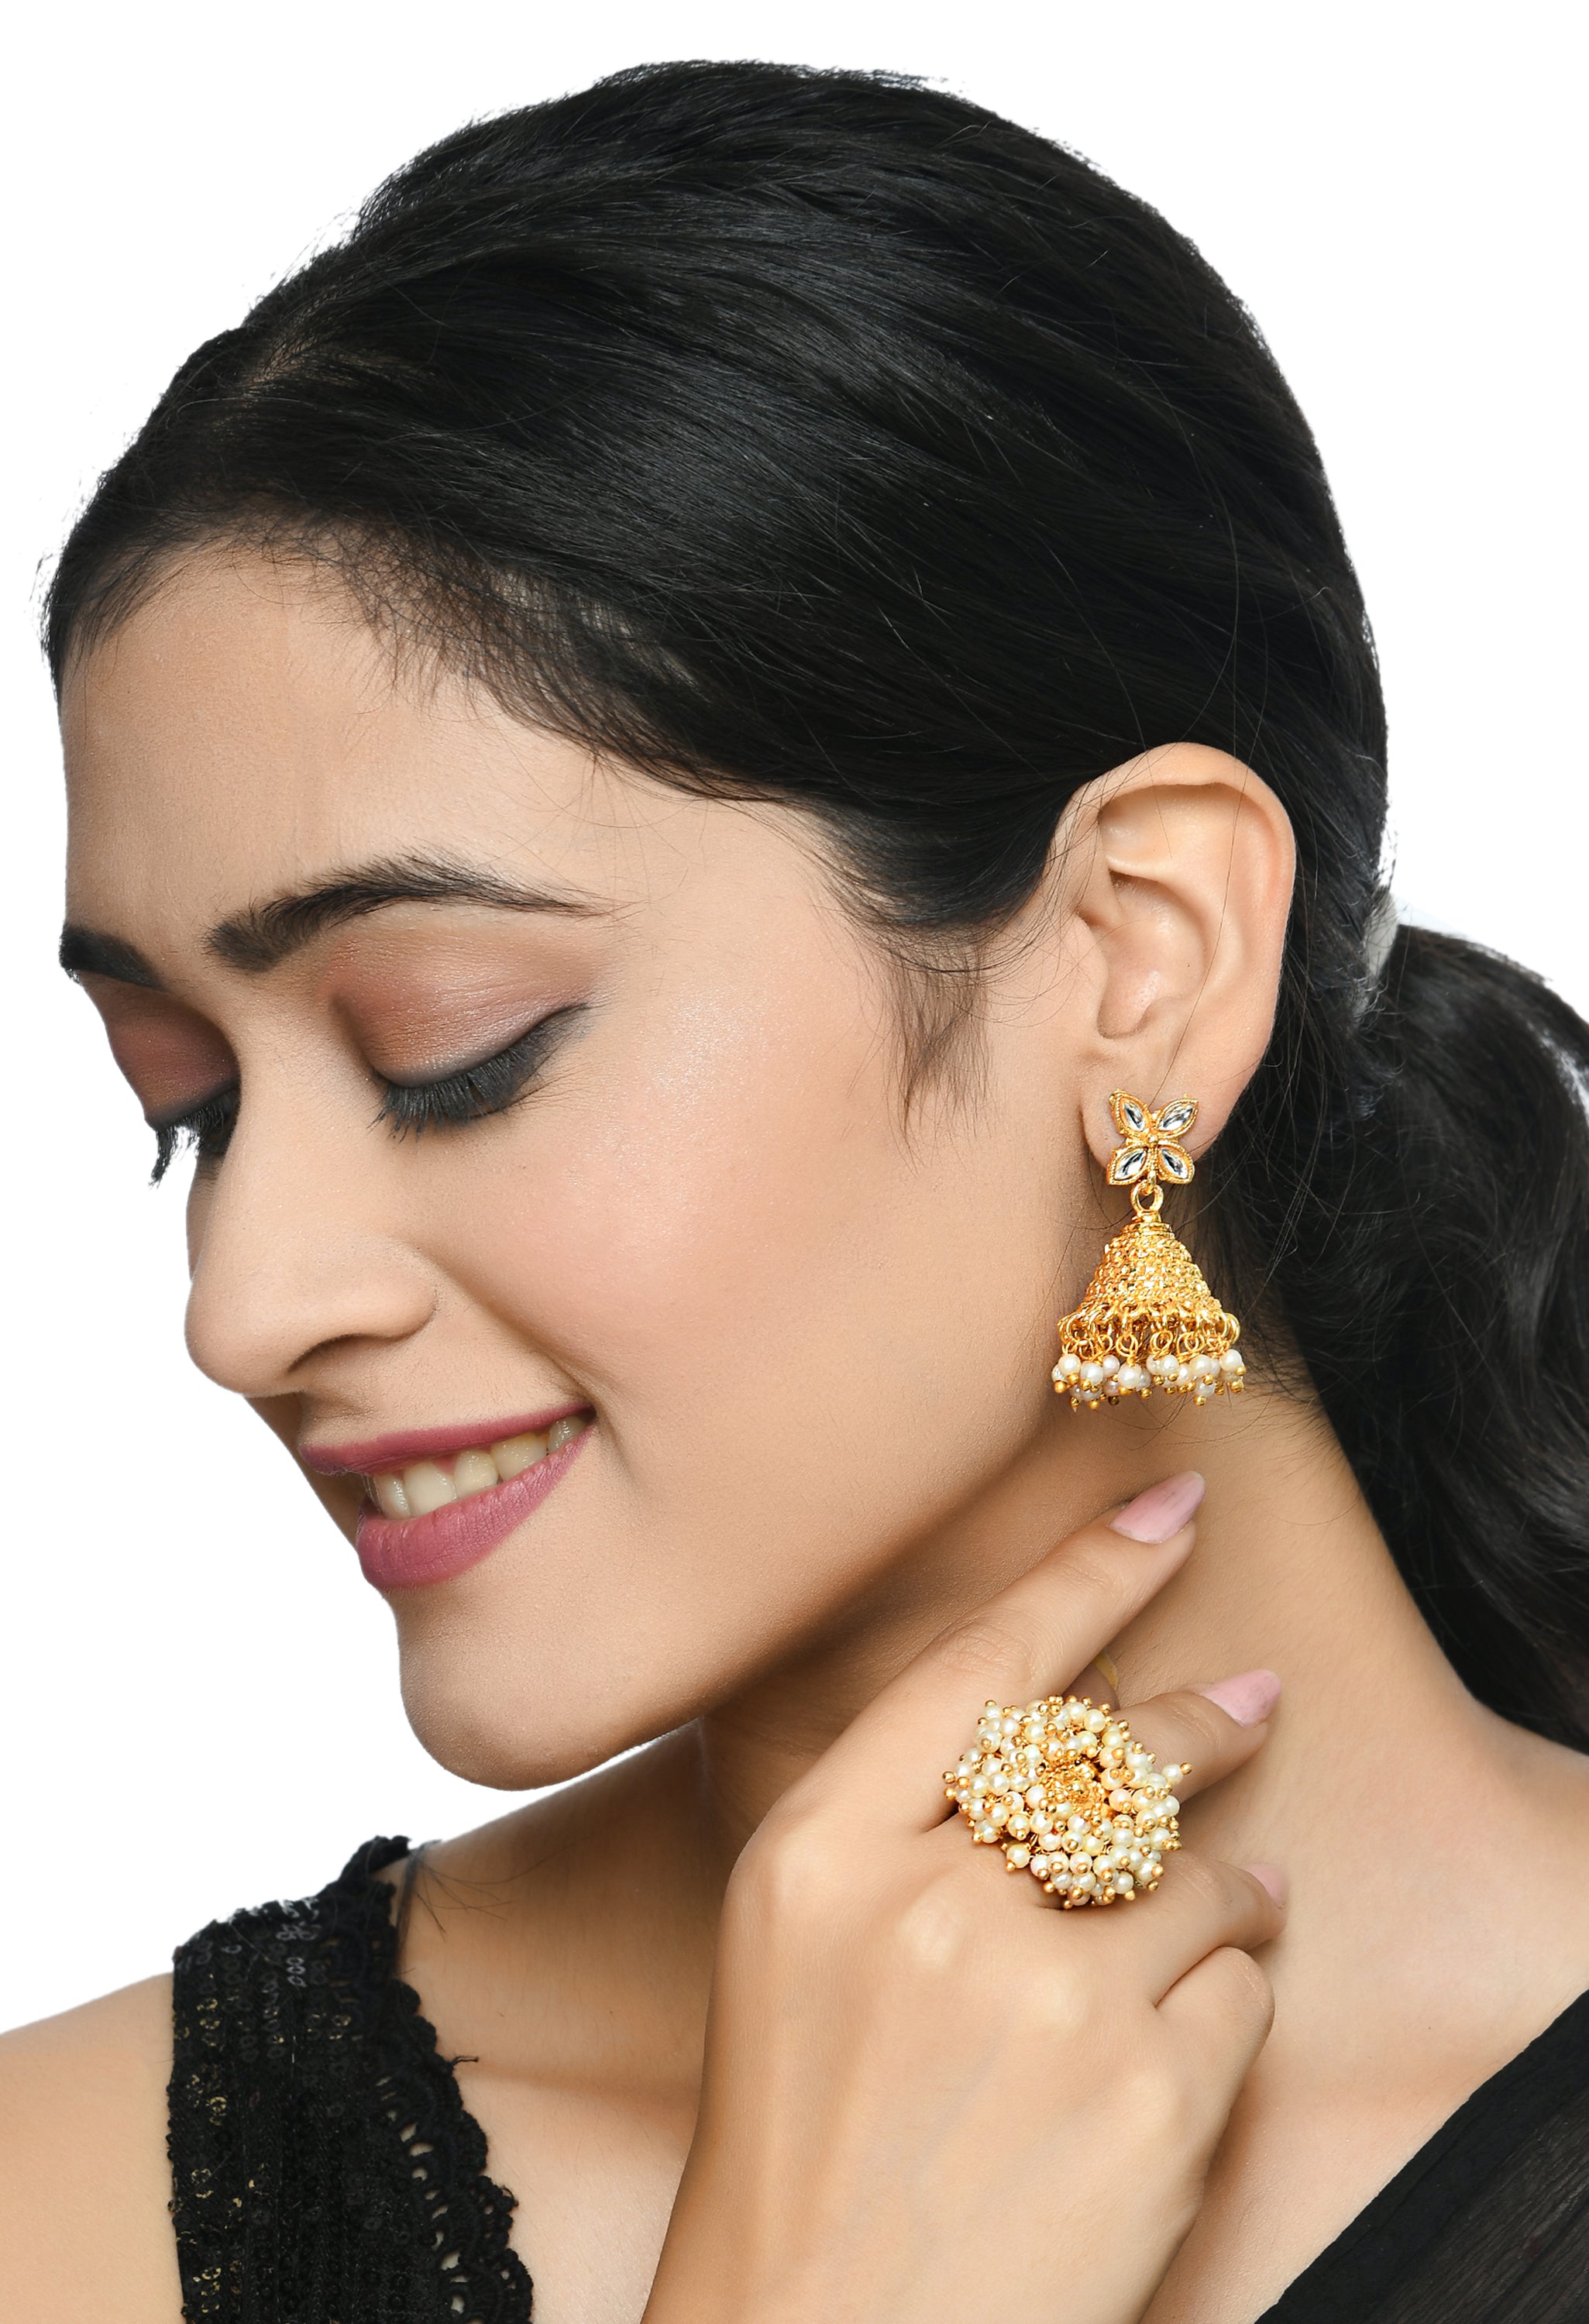 Women's Gold-Plated With Pearls Ring - Kamal Johar